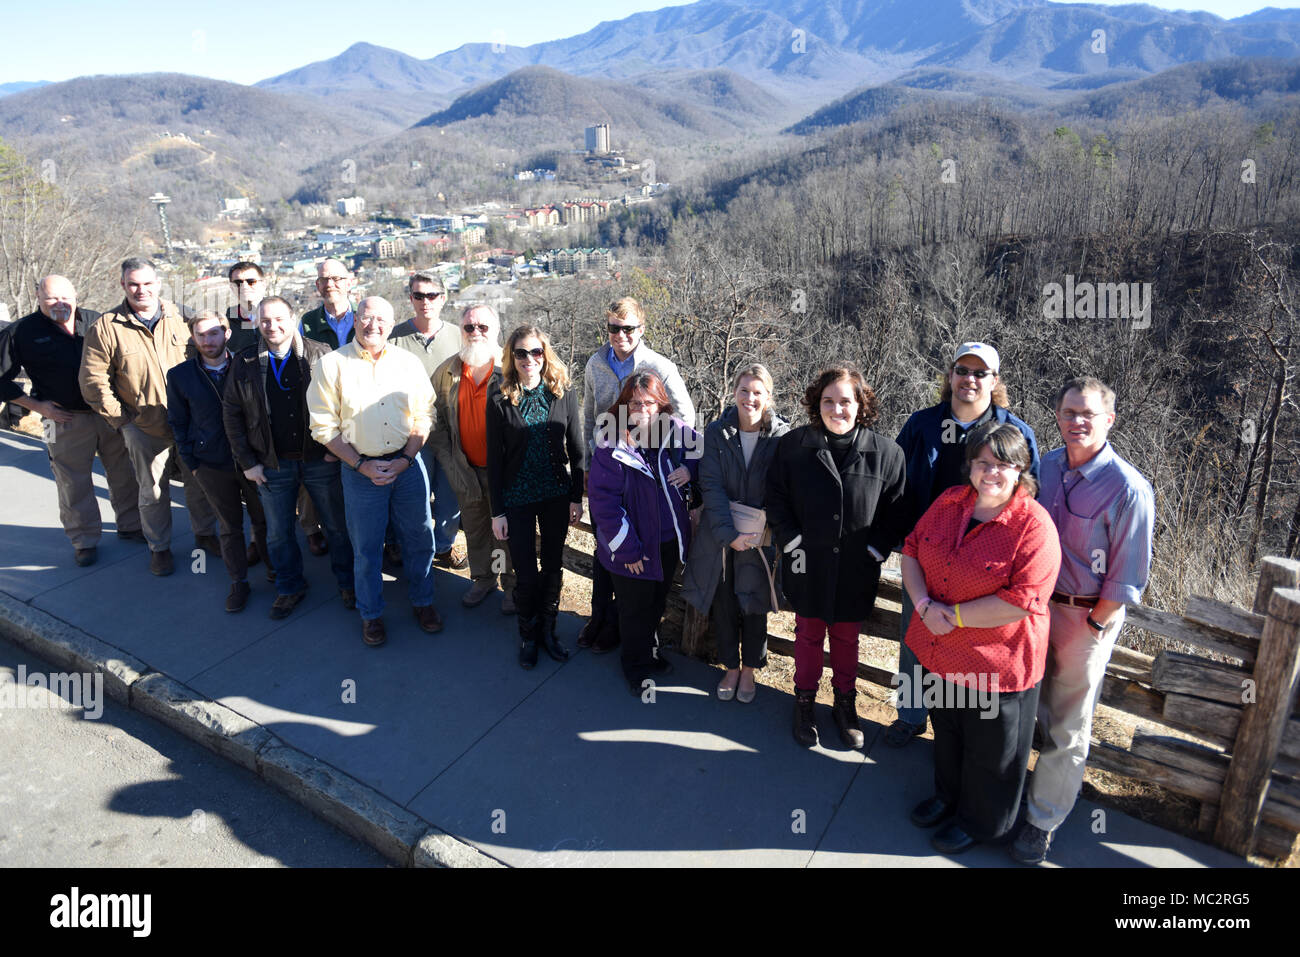 Members of Tennessee Silver Jackets pose at the Gatlinburg Bypass Overlook overlooking Gatlinburg, Tenn., Jan. 25, 2018.  The team toured the area and received a briefing on the wildfires that moved through Sevier County and city of Gatlinburg in November 2016. Silver Jackets is an innovative partnership where local, state and federal agencies facilitate flood risk reduction, coordinates programs, promotes cohesive solutions, synchronizes plans and policies, and ultimately provides integrated solutions. (USACE photo by Leon Roberts) Stock Photo